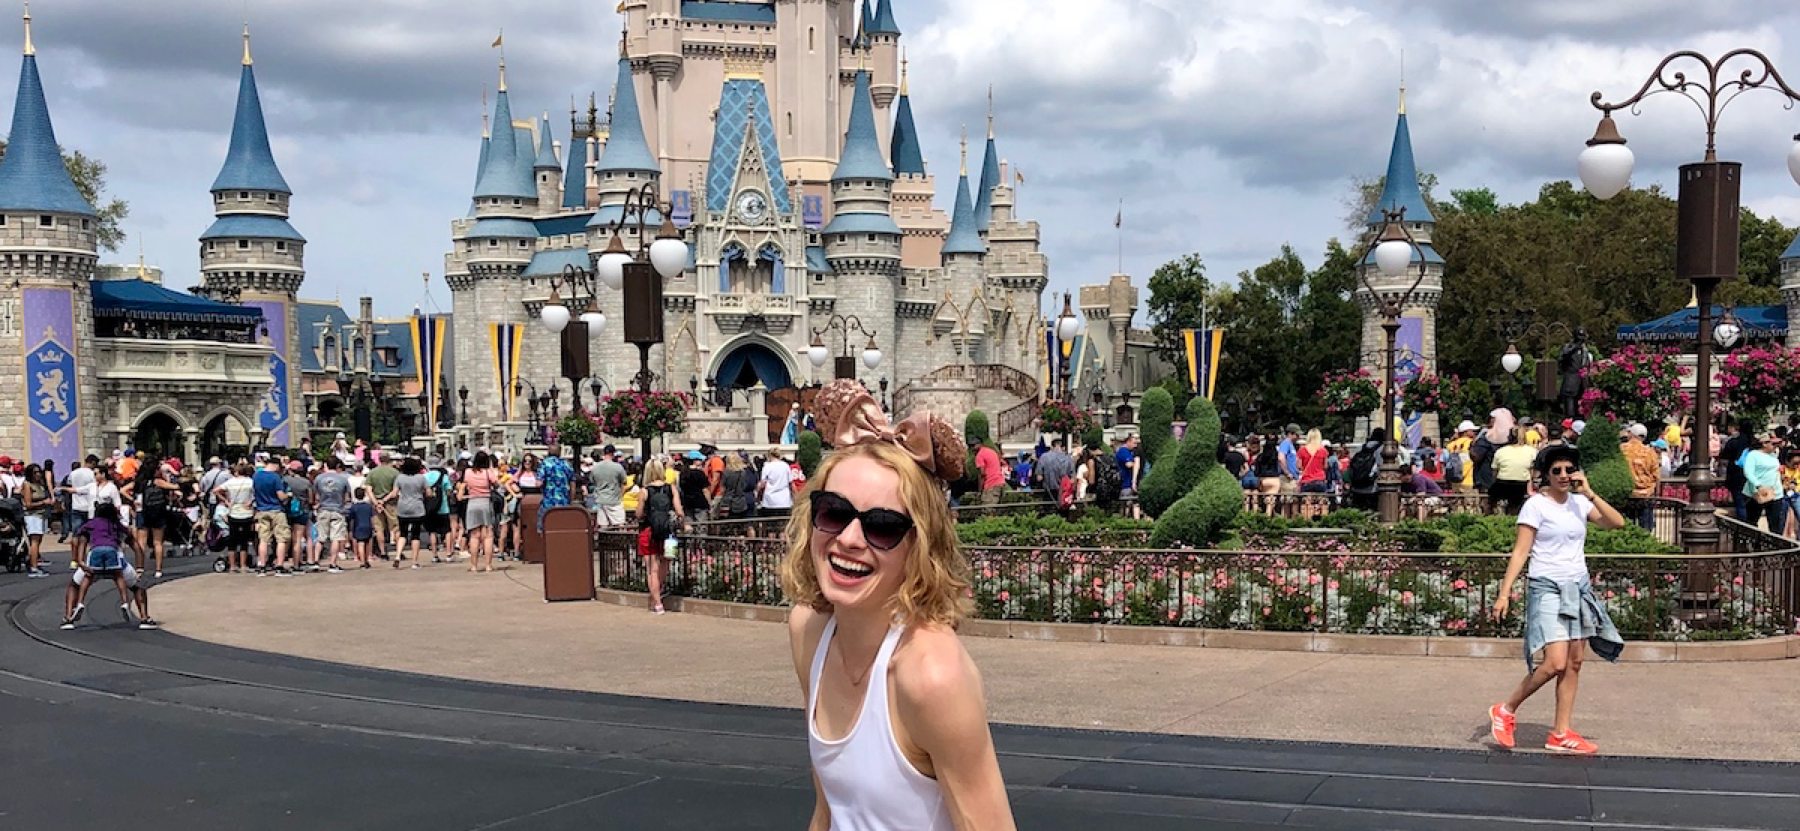 Smiling woman in front of Cinderella's castle at Disney World